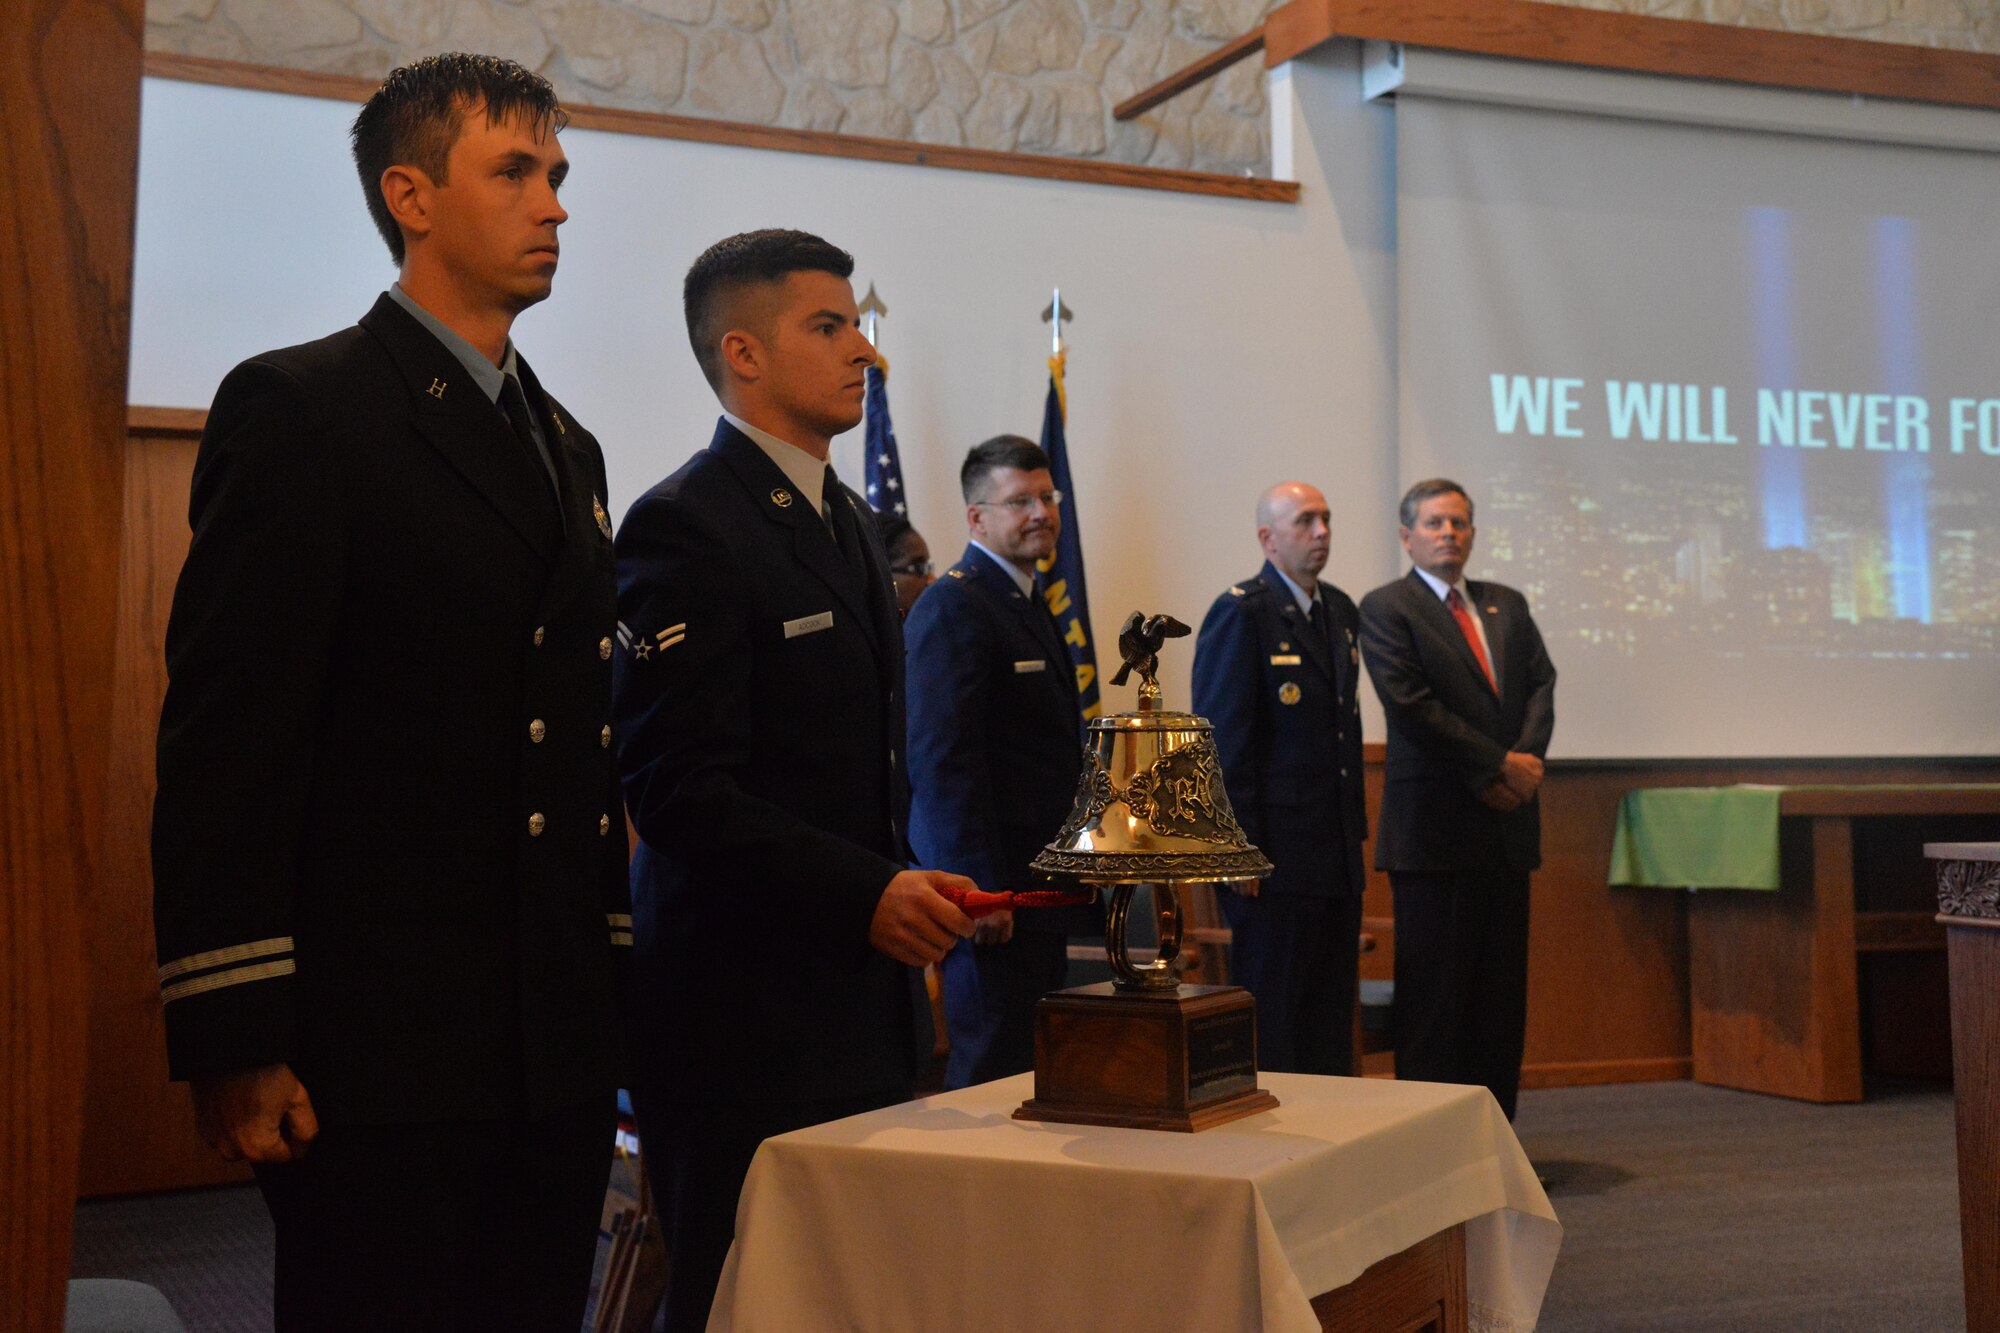 Airman 1st Class Matthew Adcock, 341st Civil Engineer Squadron firefighter, rings a bell during the 9/11 Remembrance ceremony Sept. 9, 2016, at Malmstrom Air Force Base, Mont. The ringing of the bell symbolizes the end of the duty day for the firemen who lost their lives on Sept. 11, 2001. (U.S. Air Force photo/Airman 1st Class Daniel Brosam)